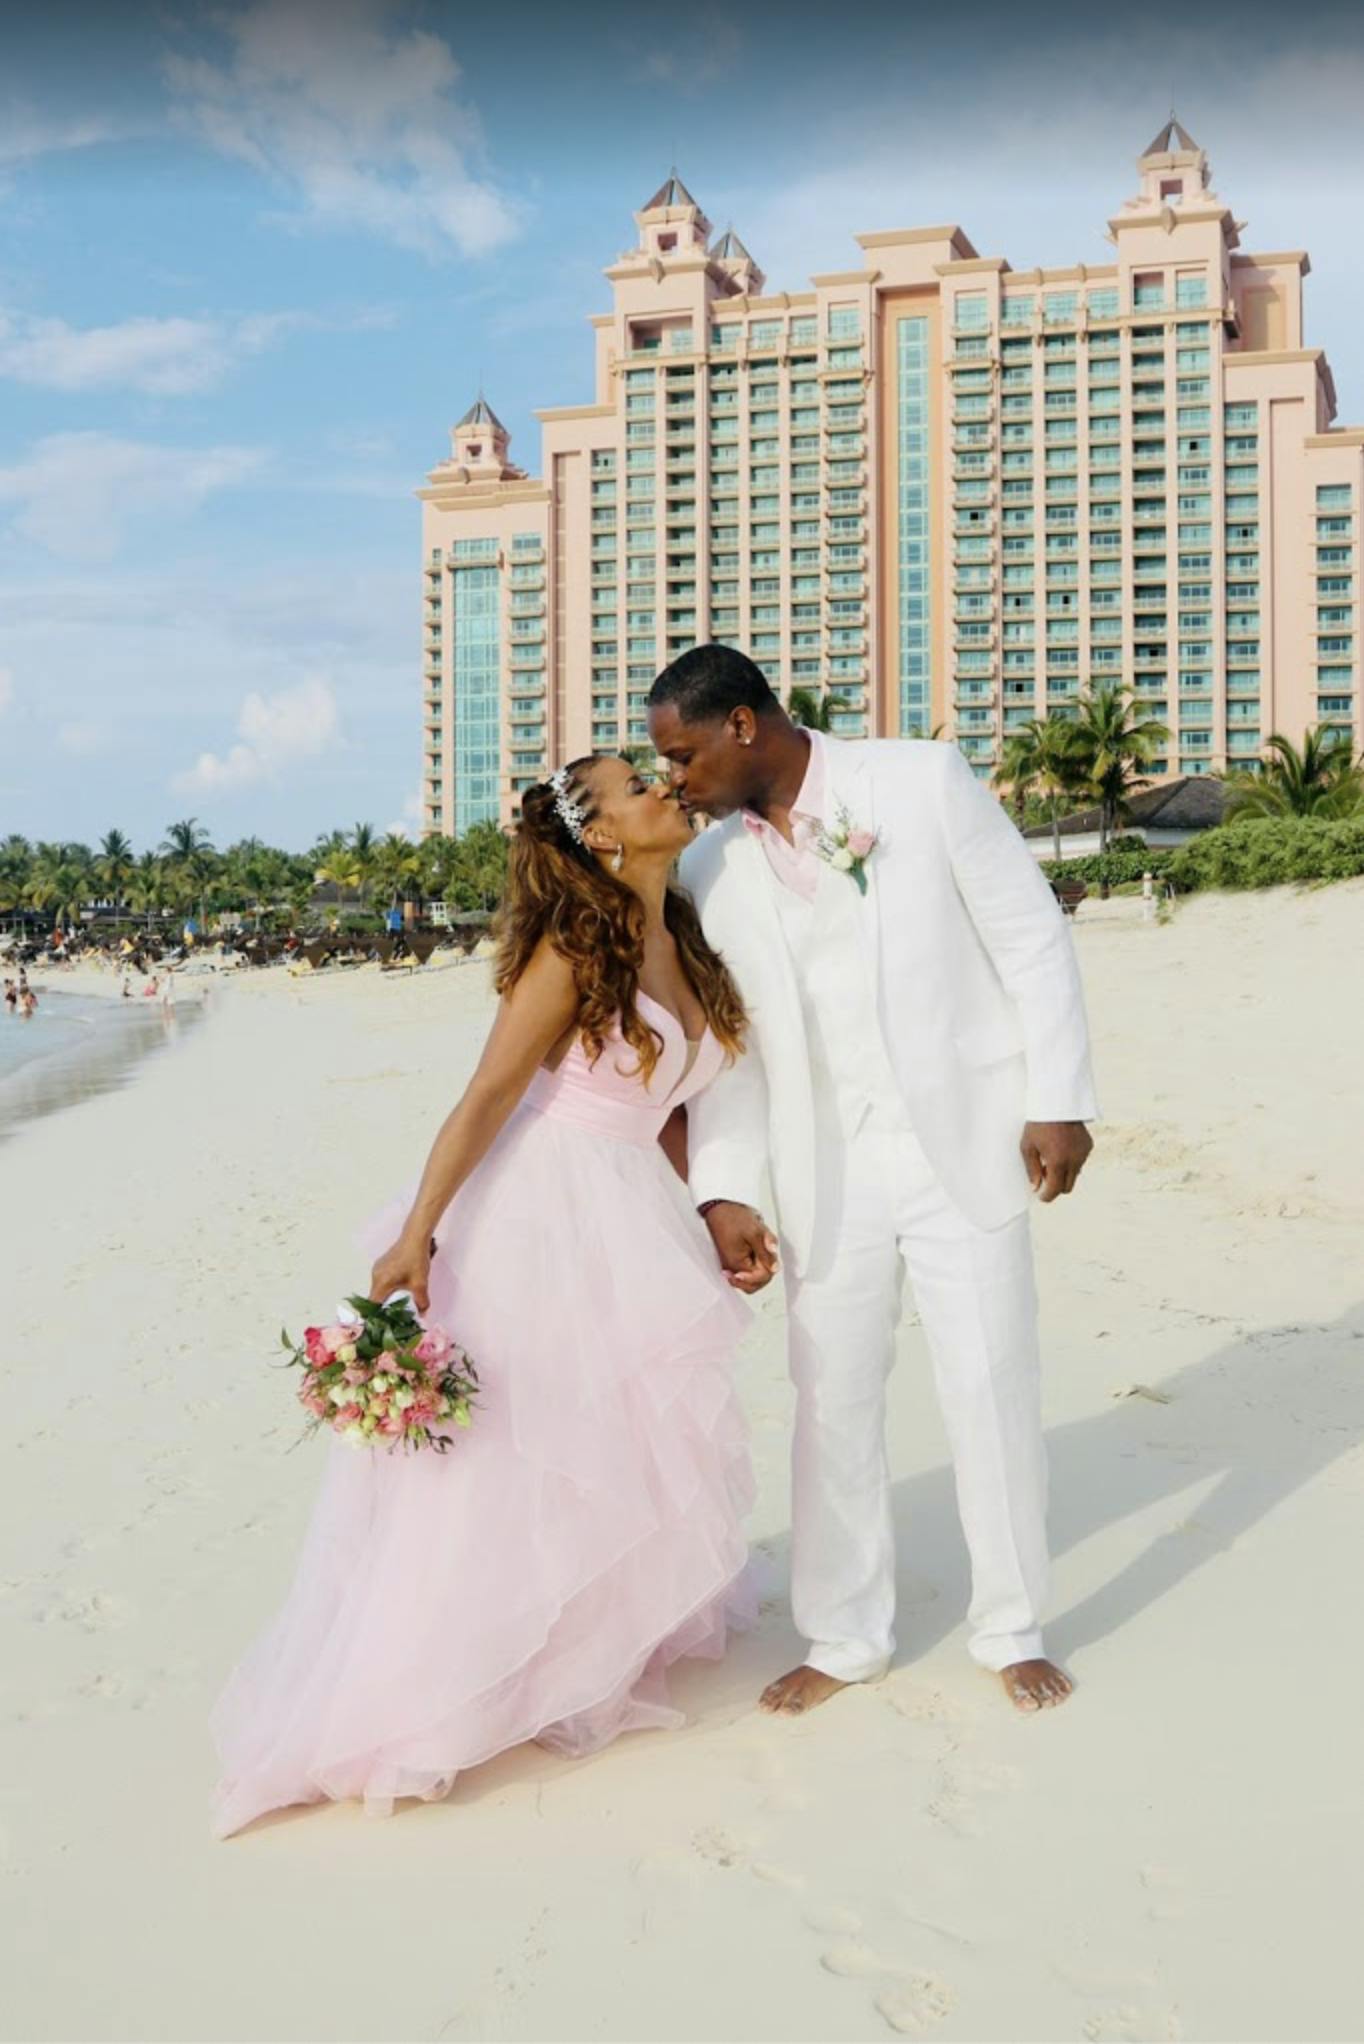 Elope to The Bahamas